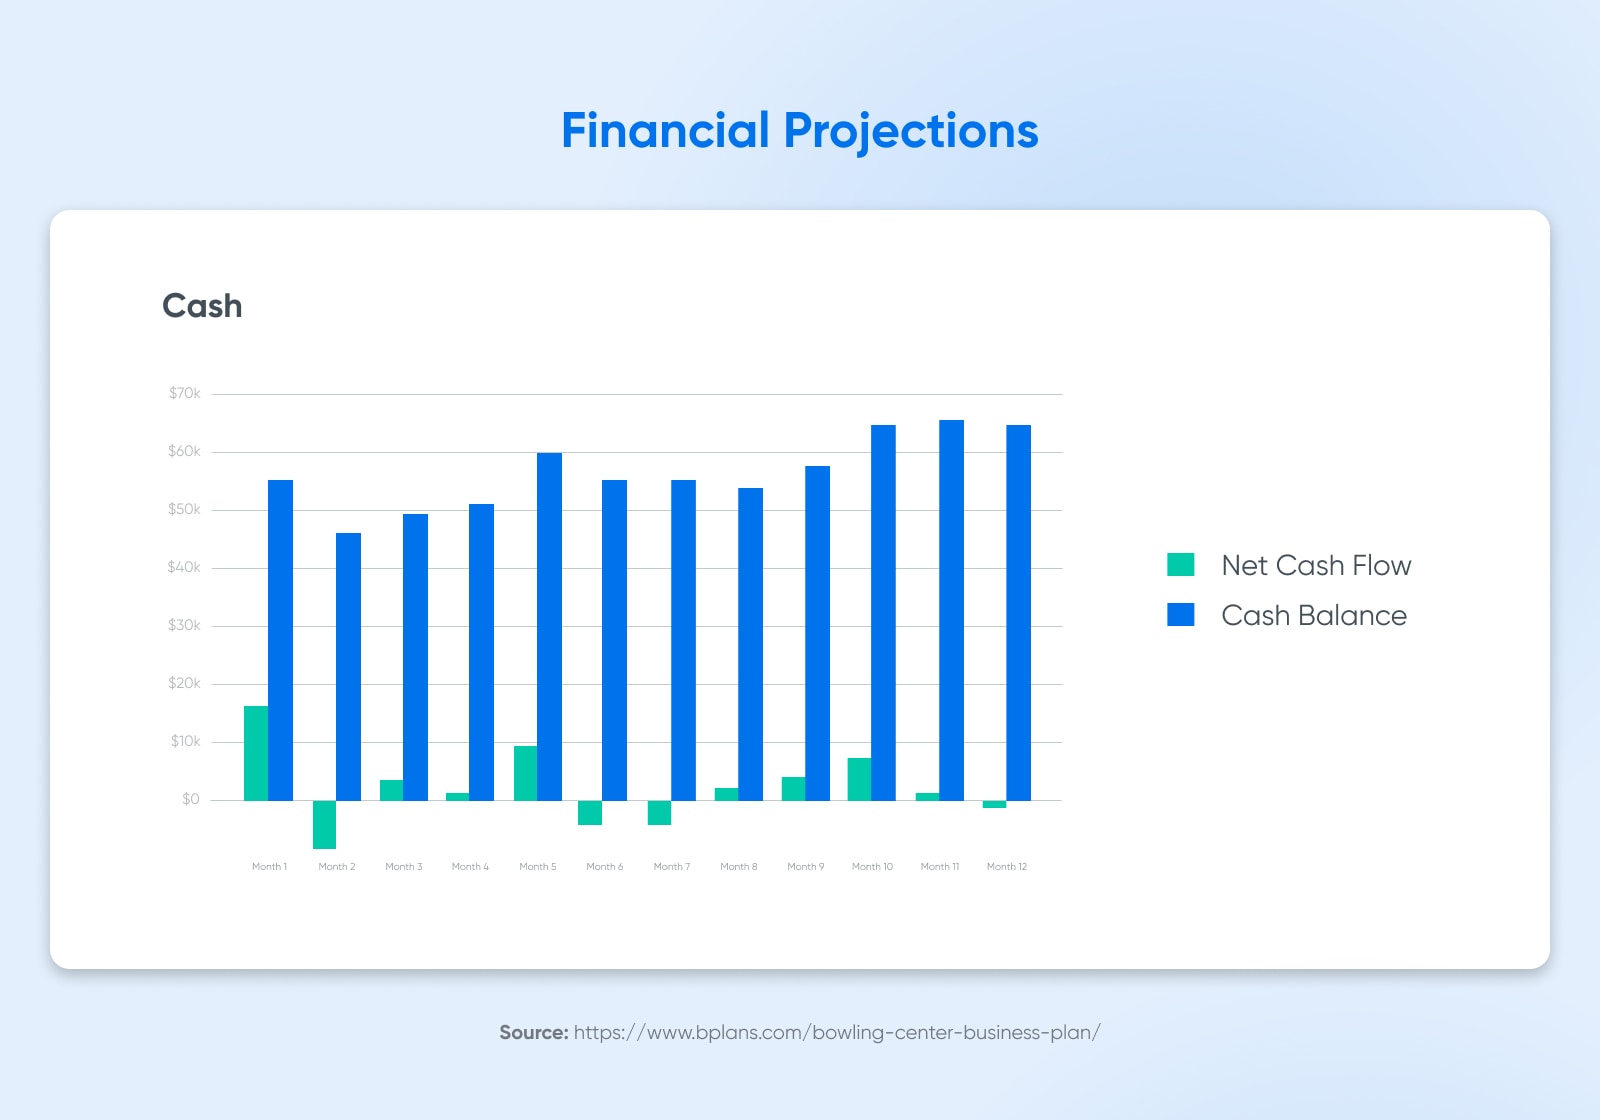 "Financial Projections" with a graph indicating net cash flow in green and cash balance in blue.